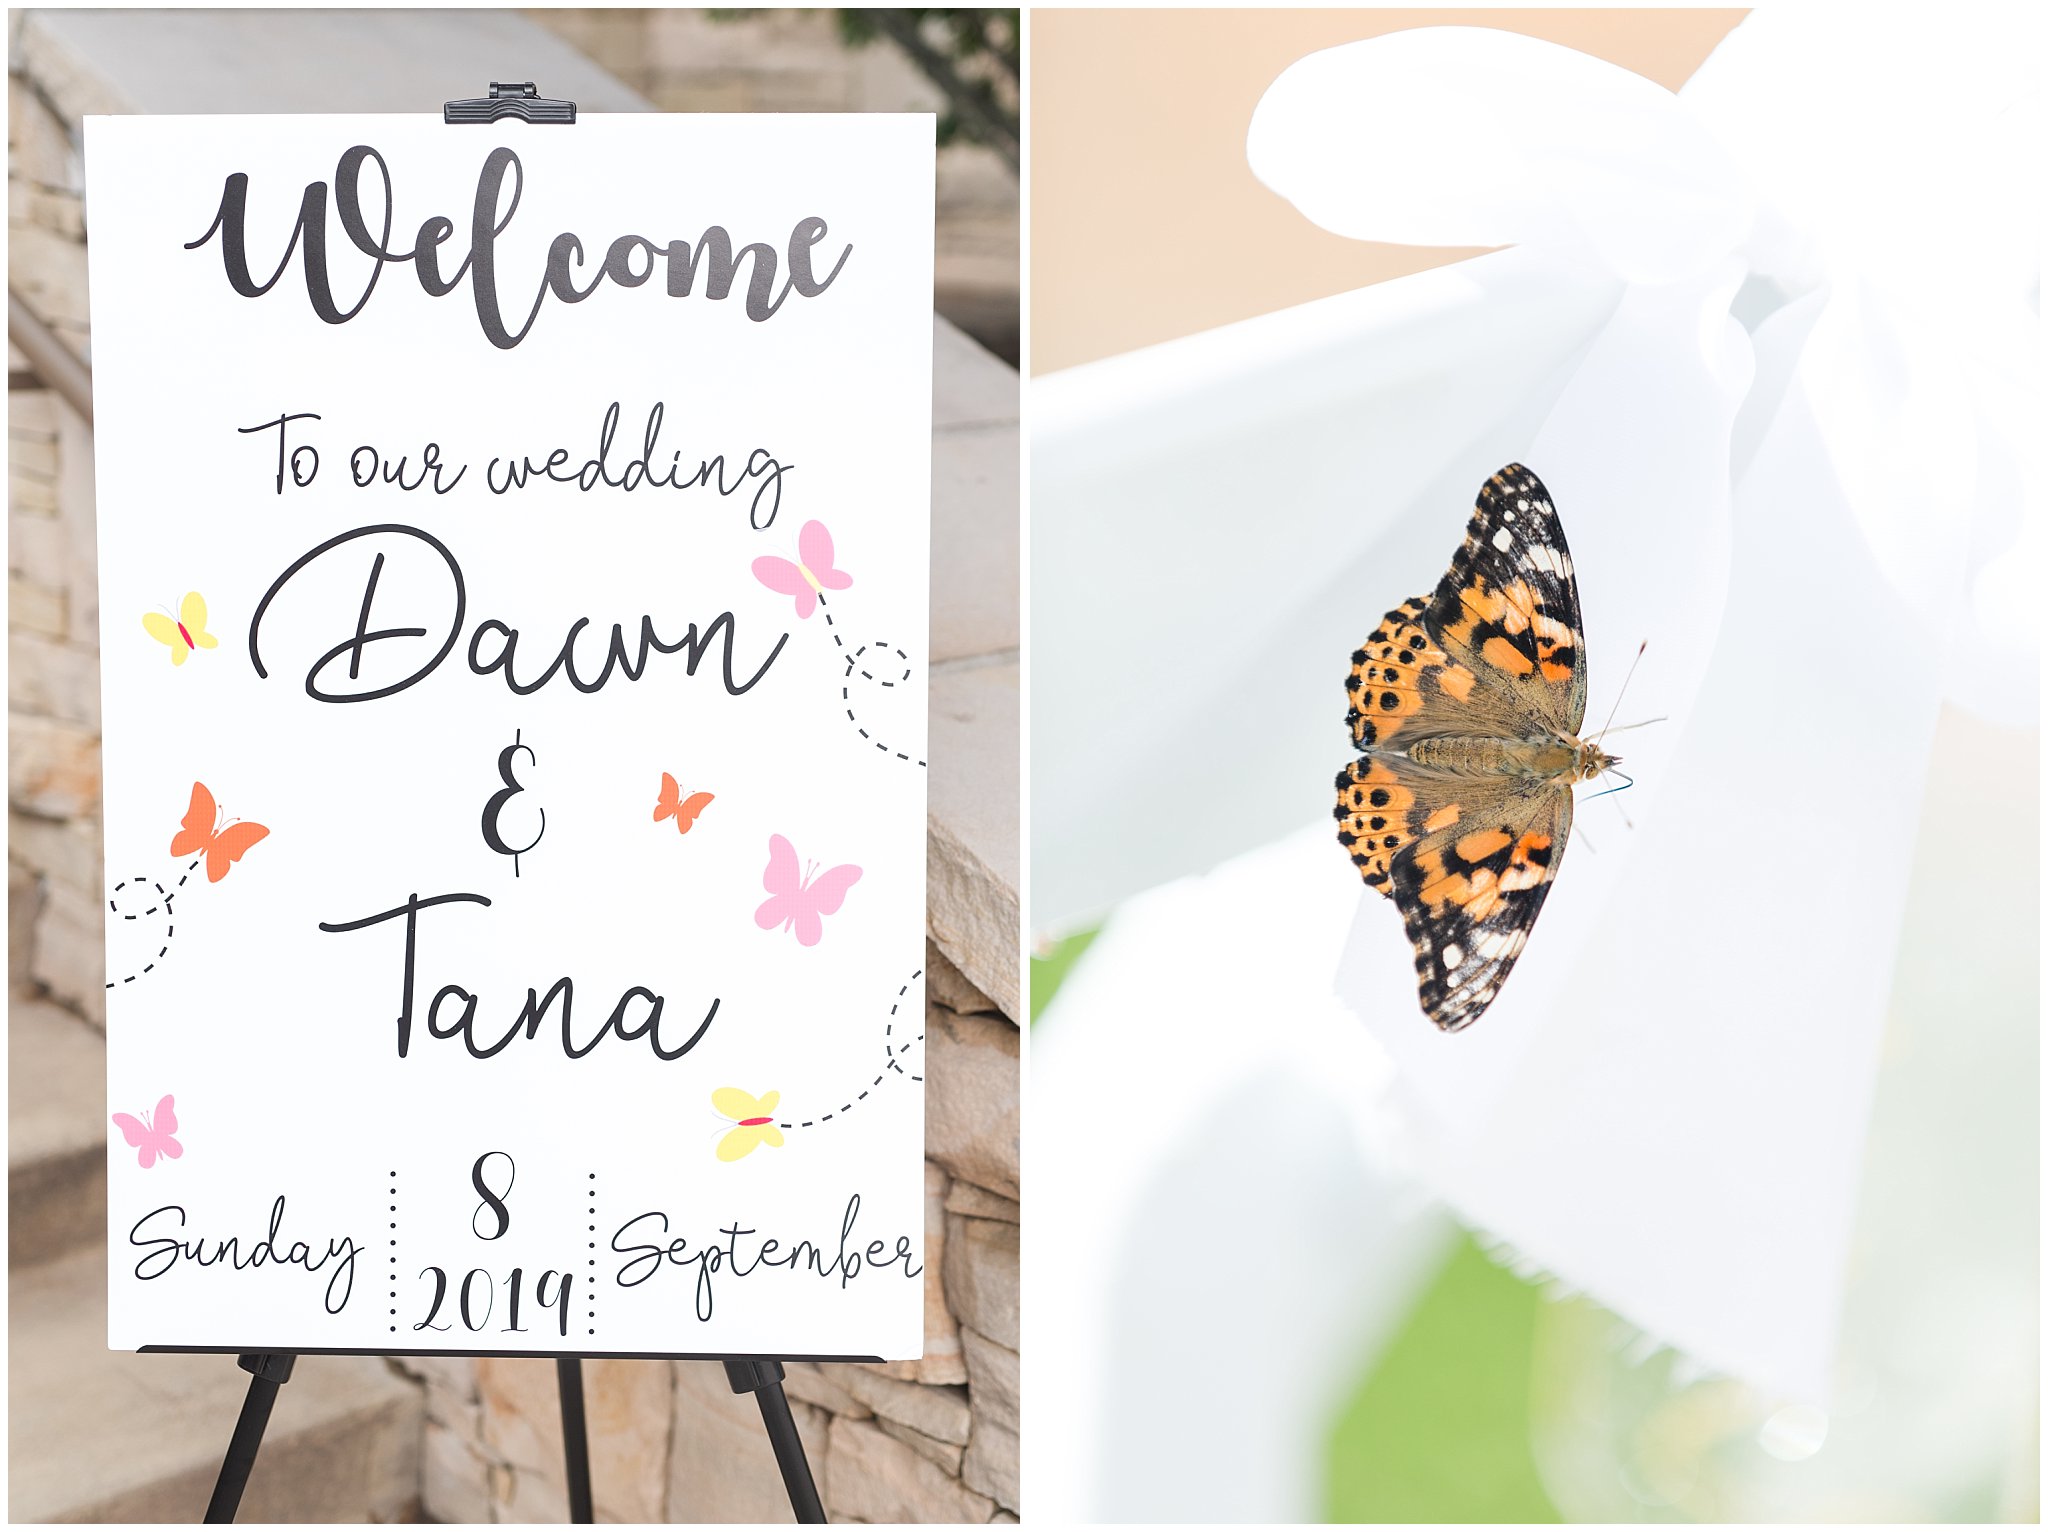 Ceremony site sign and butterfly on chair | Park City Wedding at the Hyatt Centric | Jessie and Dallin Photography